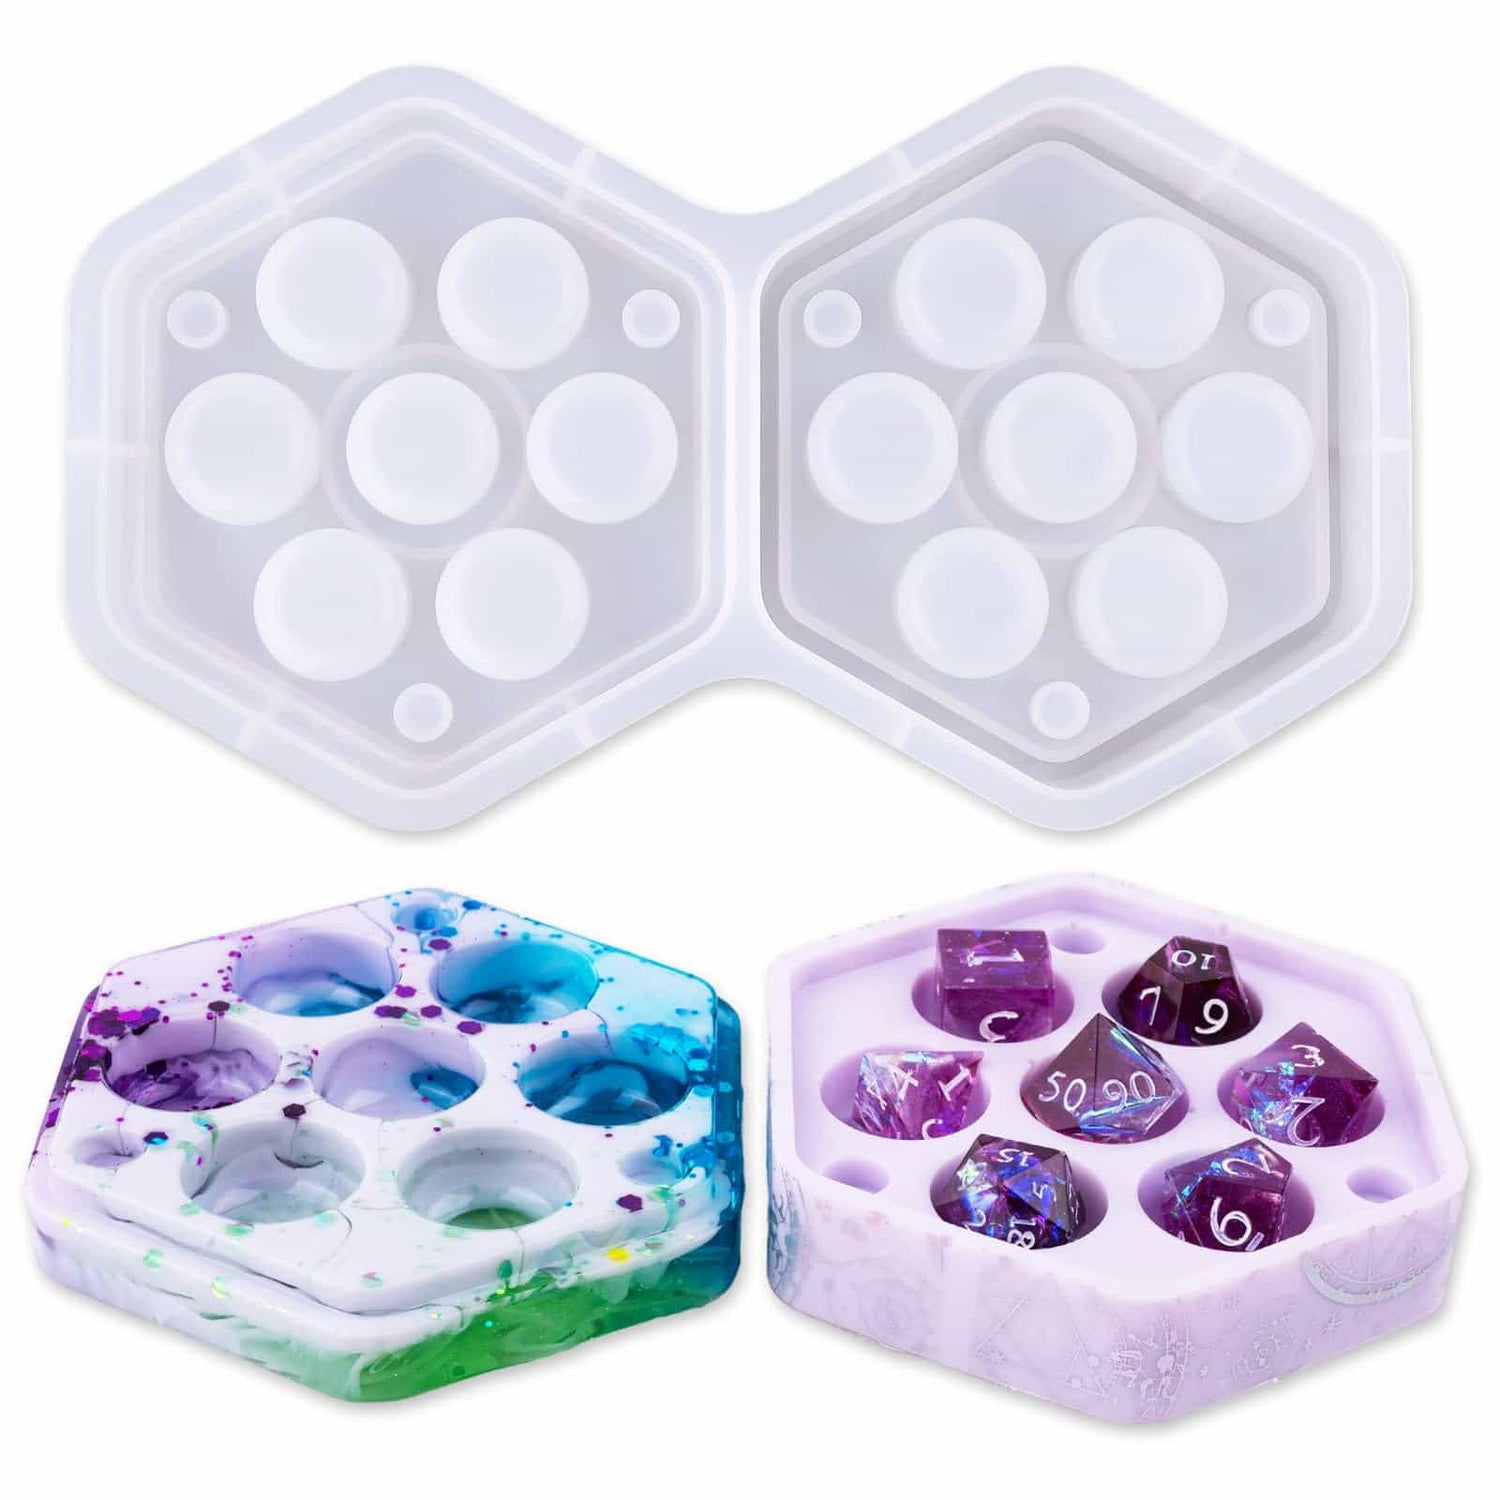 Hexagon Dice Box Molds with Lid